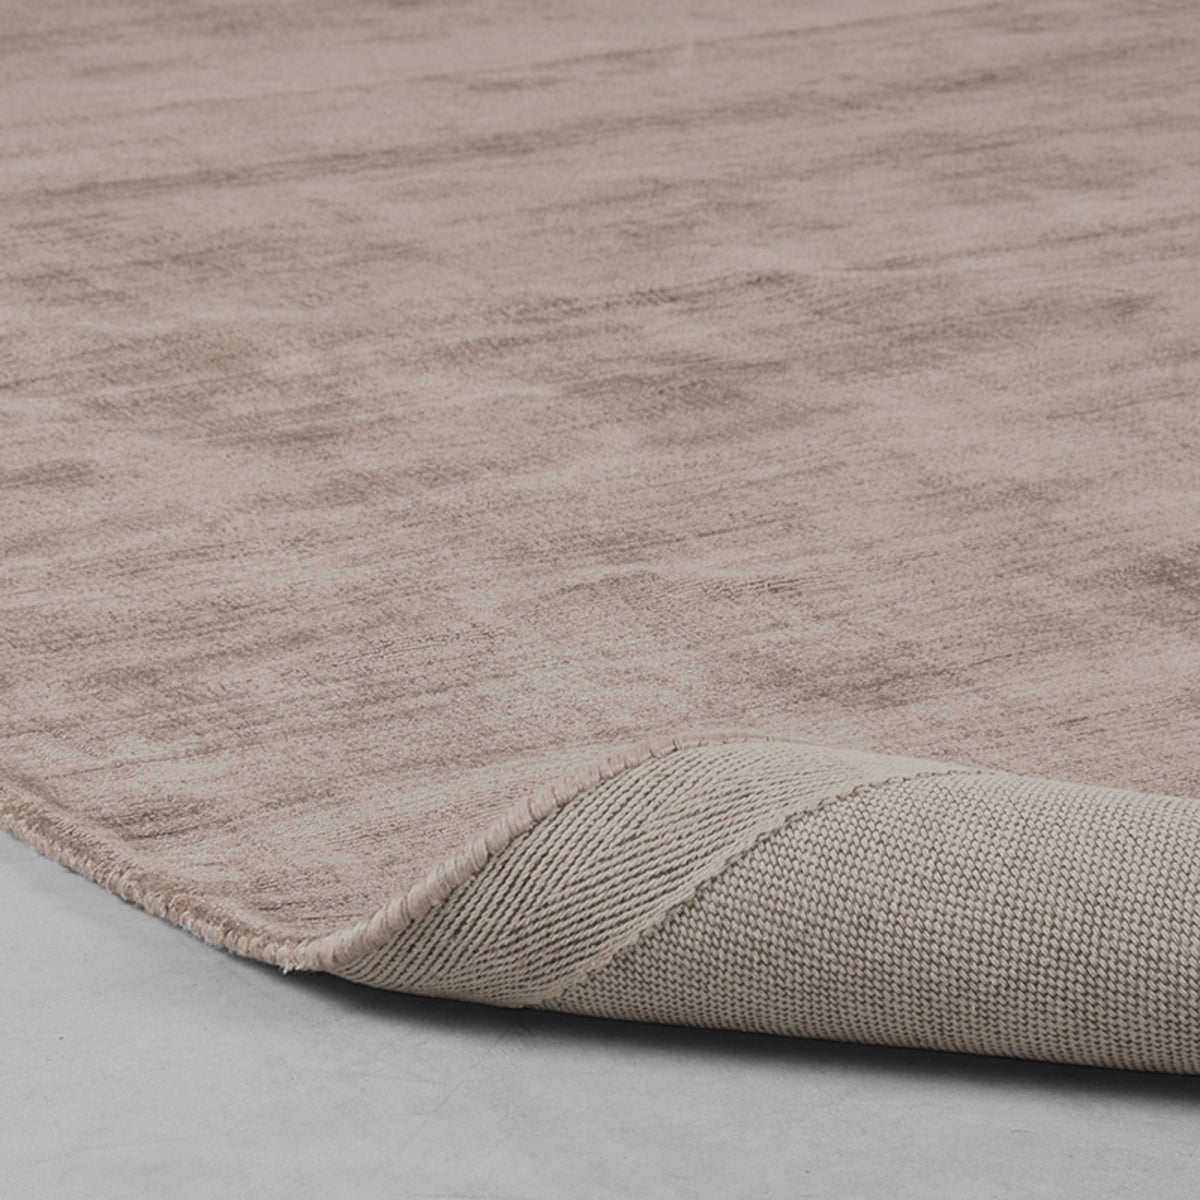 LABEL51 Rugs Velvy - Taupe - Synthetic - 160x230 cm